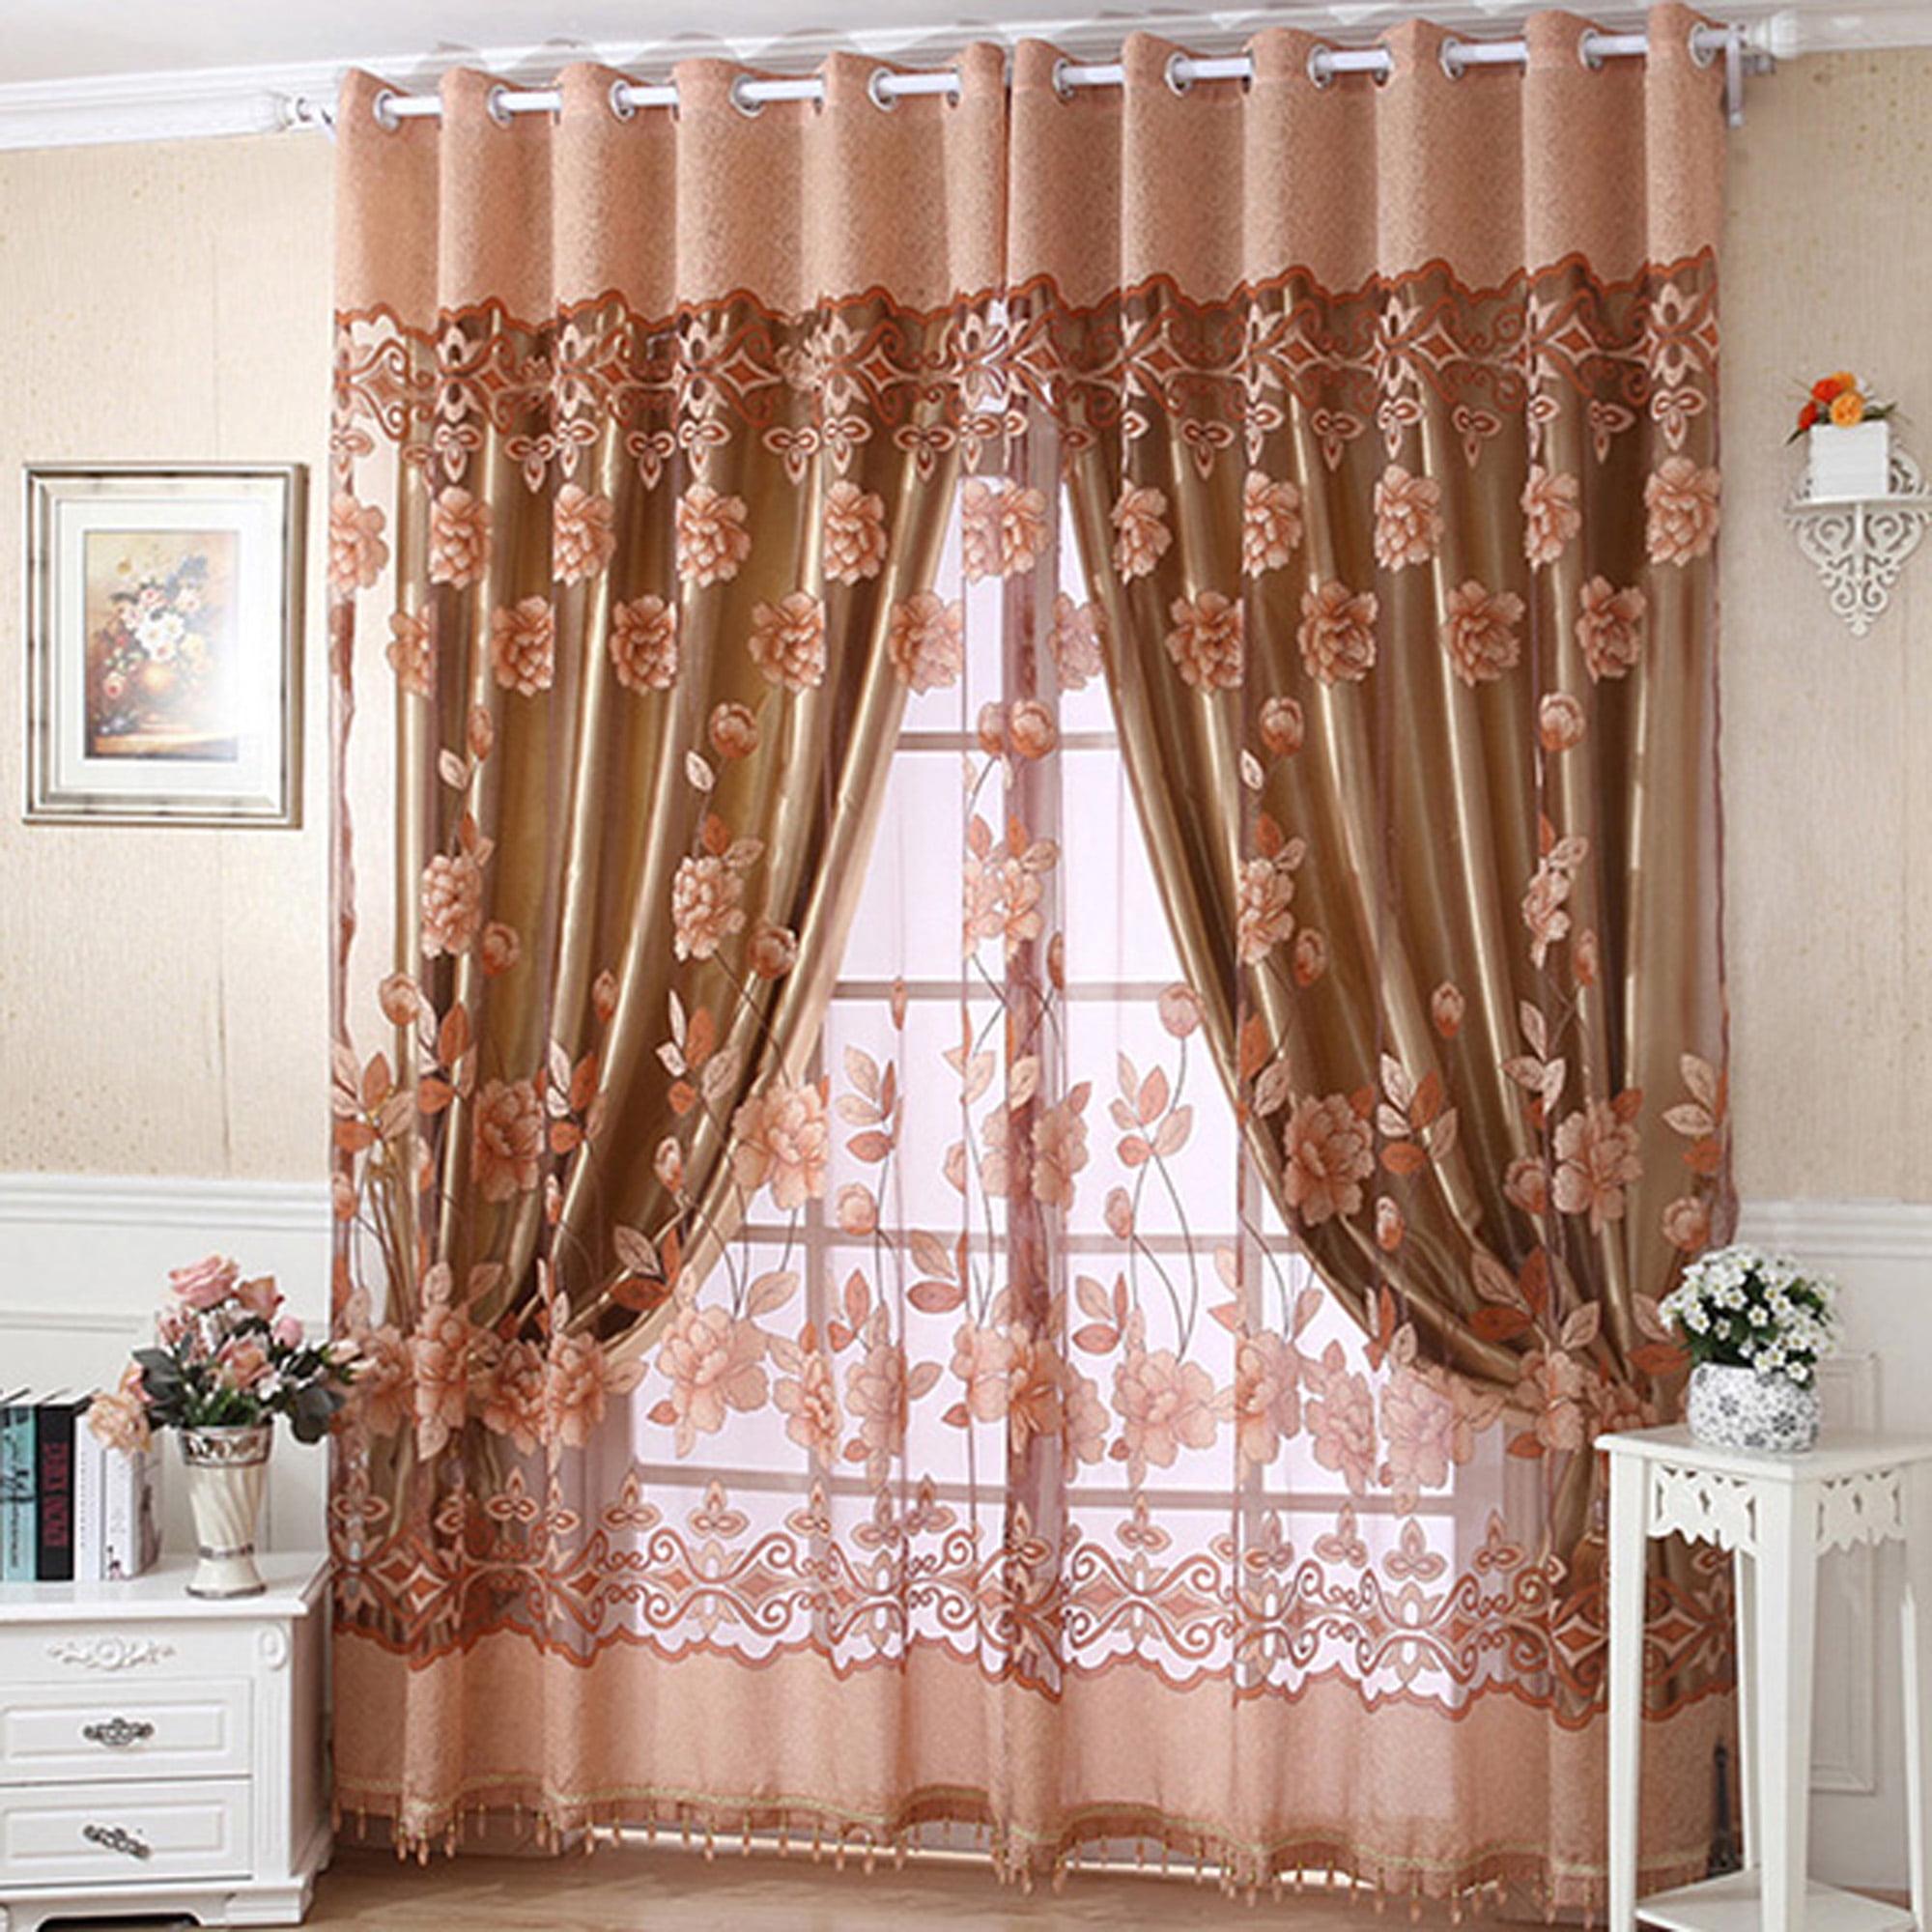 84 x 54 Inch by Lavish Home Chocolate Semi Sheer Grommet Style Curtains Floral Embroidered Pattern Window Curtain Panel for Living Room Bedroom 63-207-84-C 